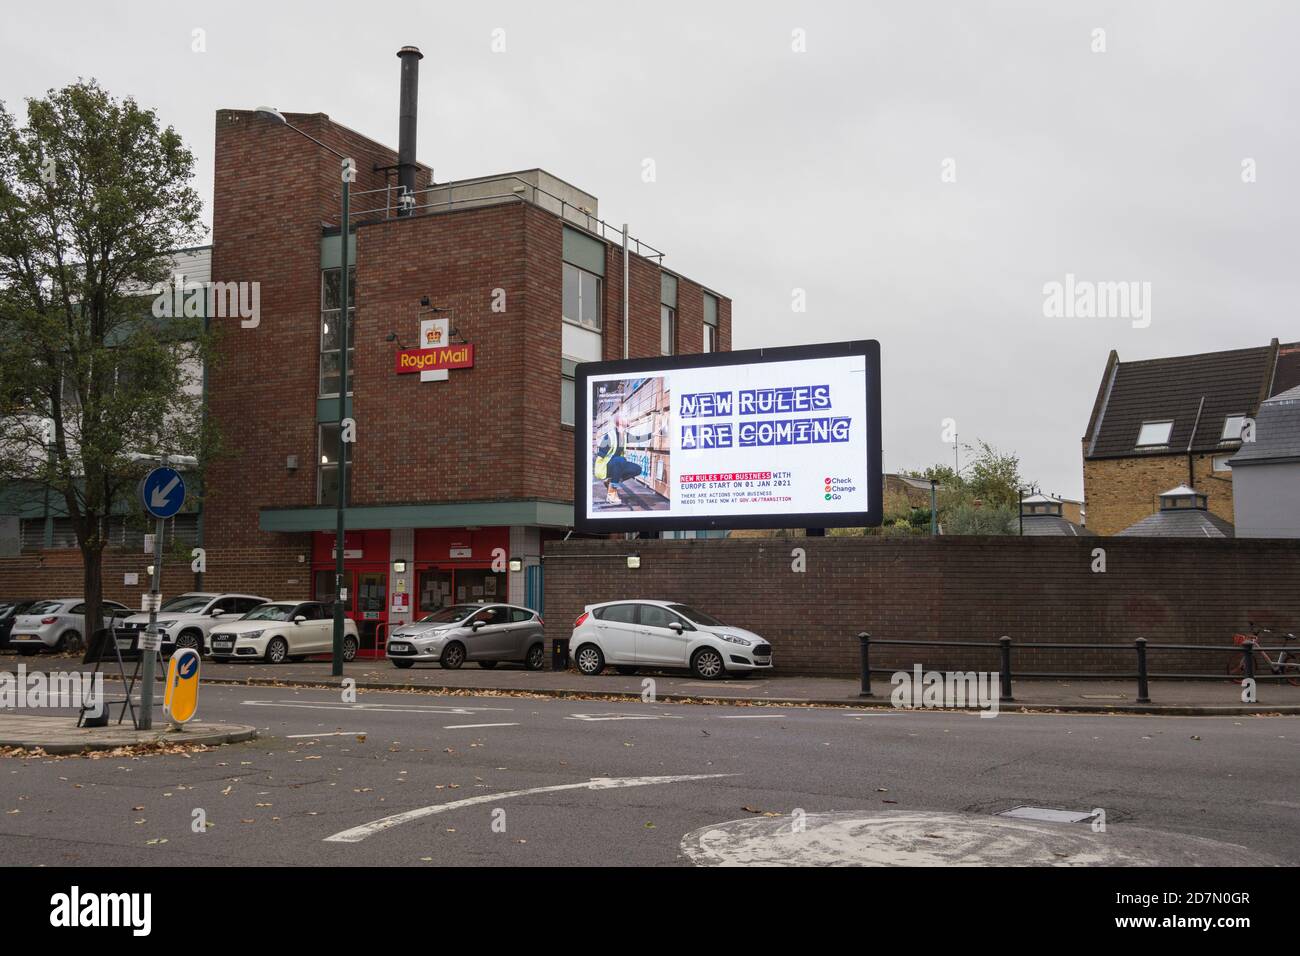 HM Government, Brexit New Rules are Coming electronic billboard advert in Mortlake, southwest London, England, UK Stock Photo